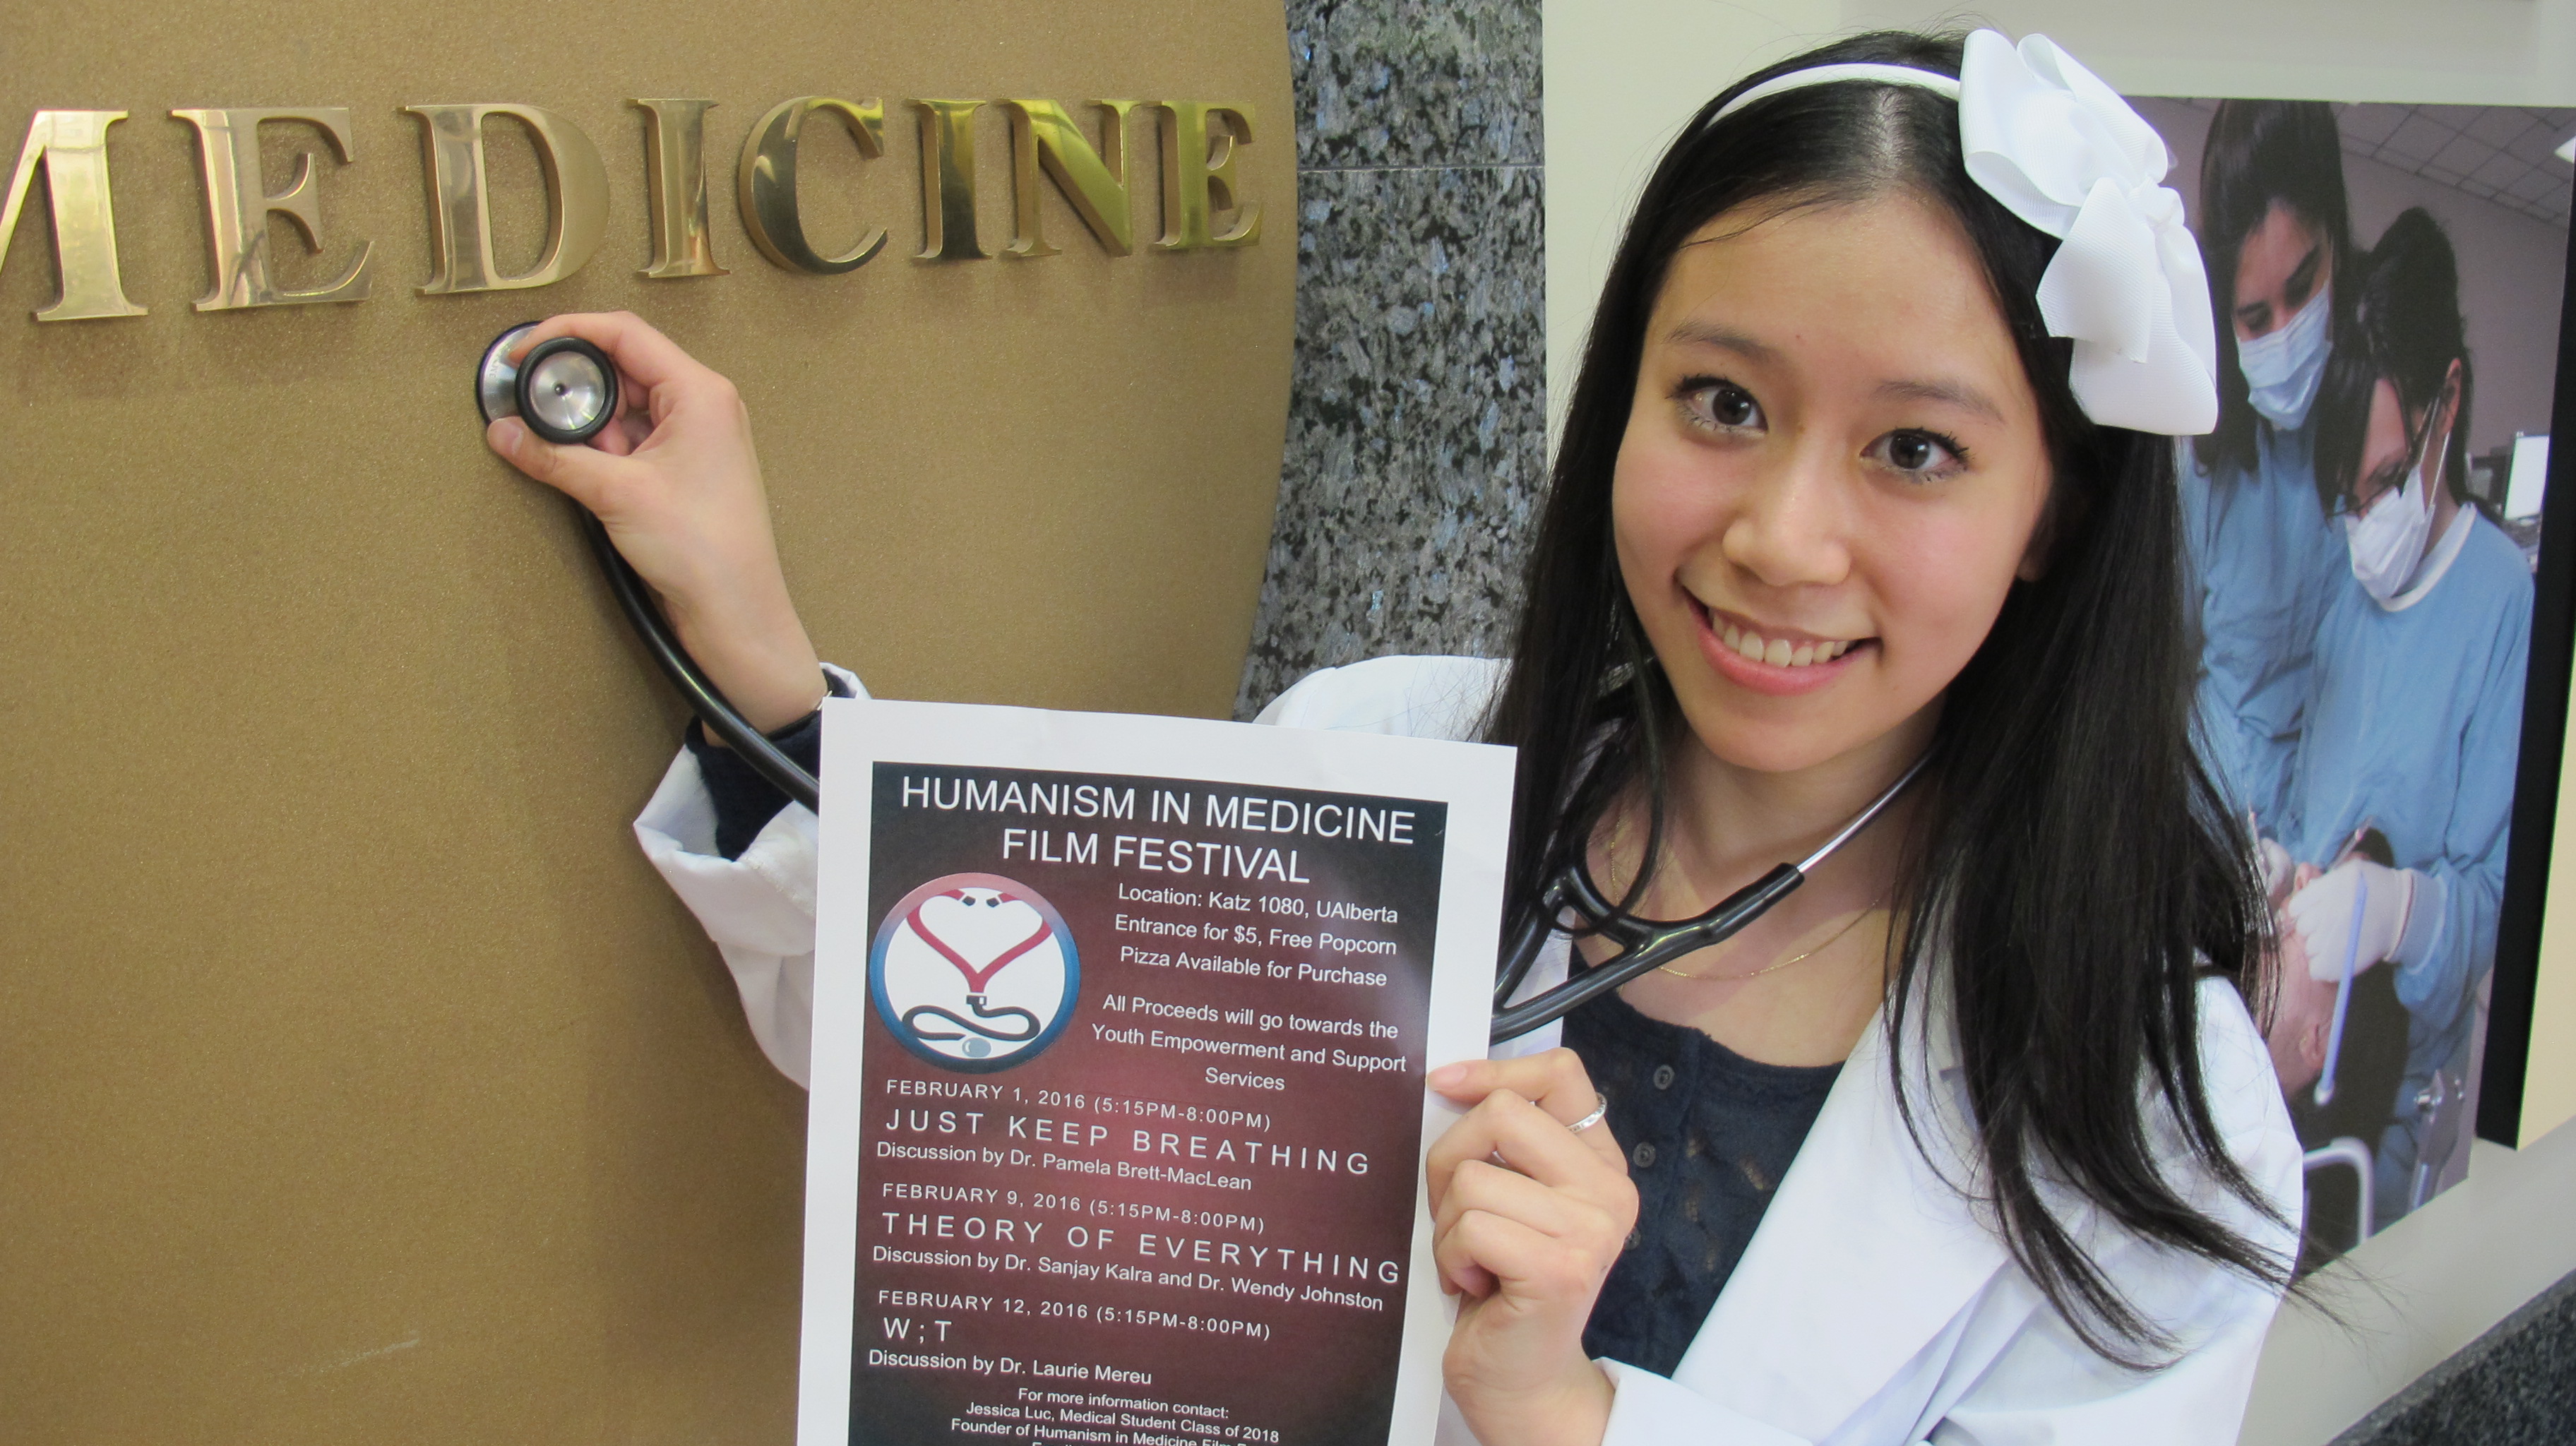 Medical student Jessica Luc is the organizer and host of the Humanism in Medicine Film Festival.